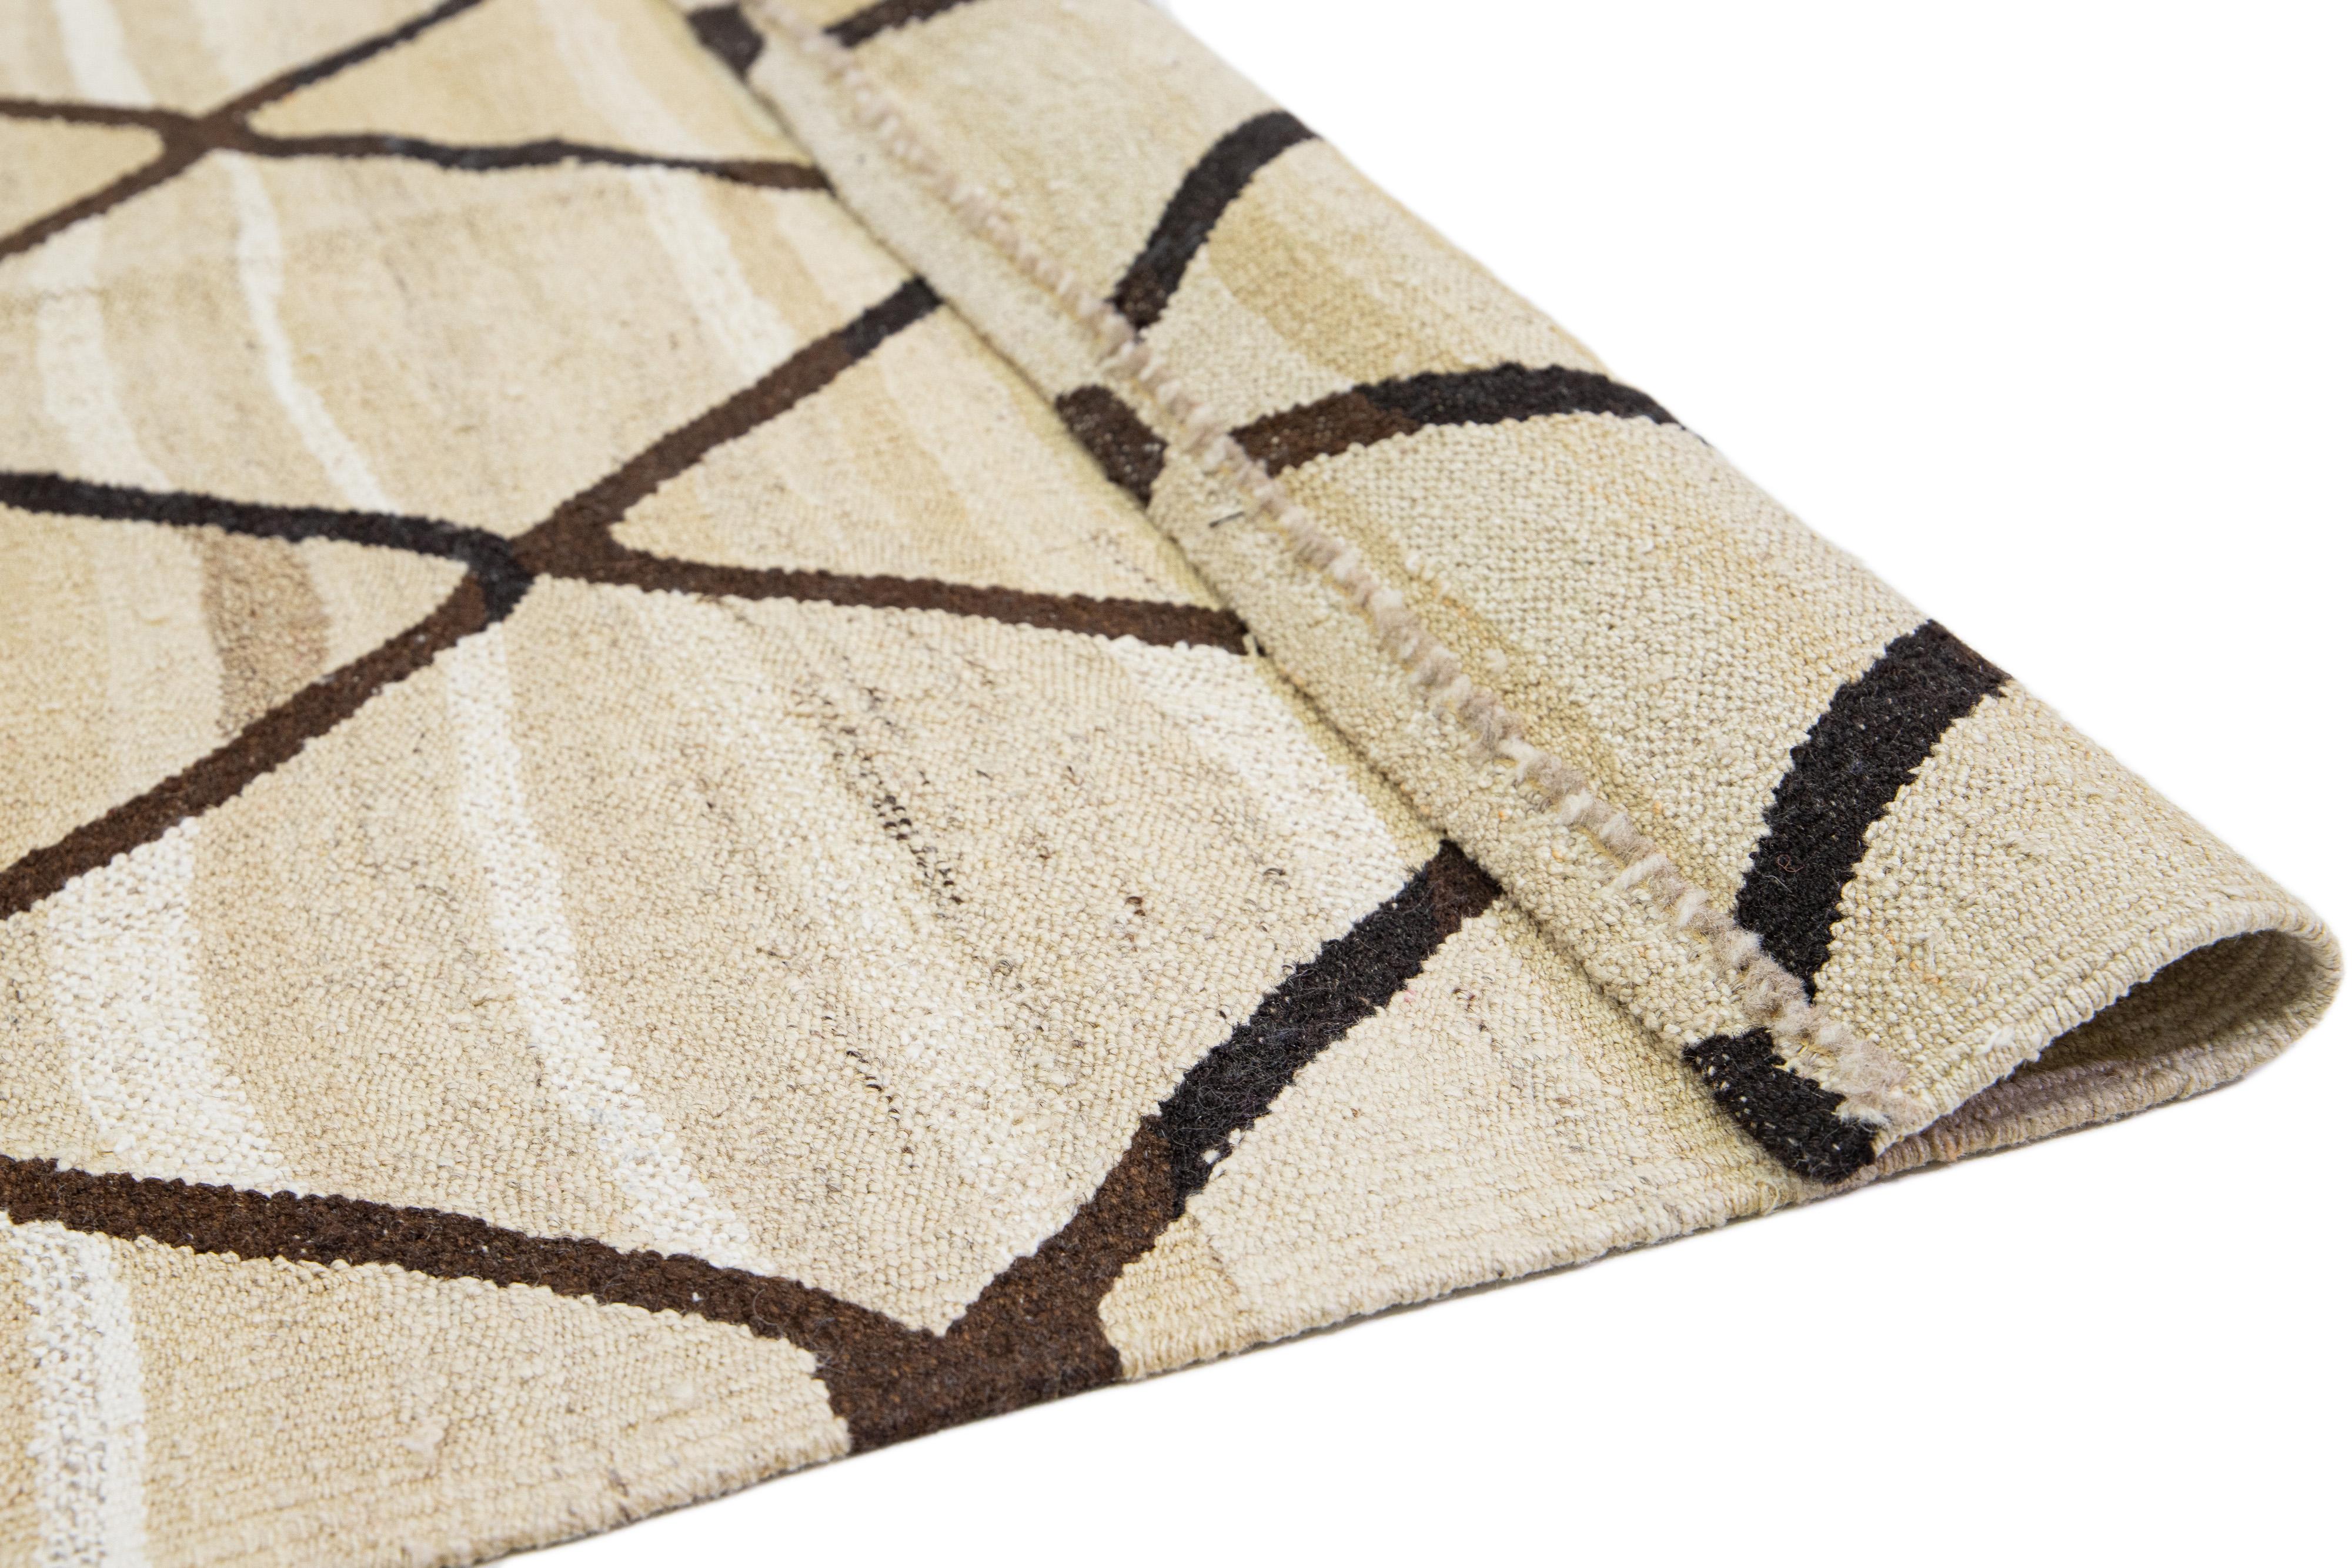 Beige Modern Turkish Kilim Wool Rug Flat-Weave with Geometric Brown Pattern   In Excellent Condition For Sale In Norwalk, CT